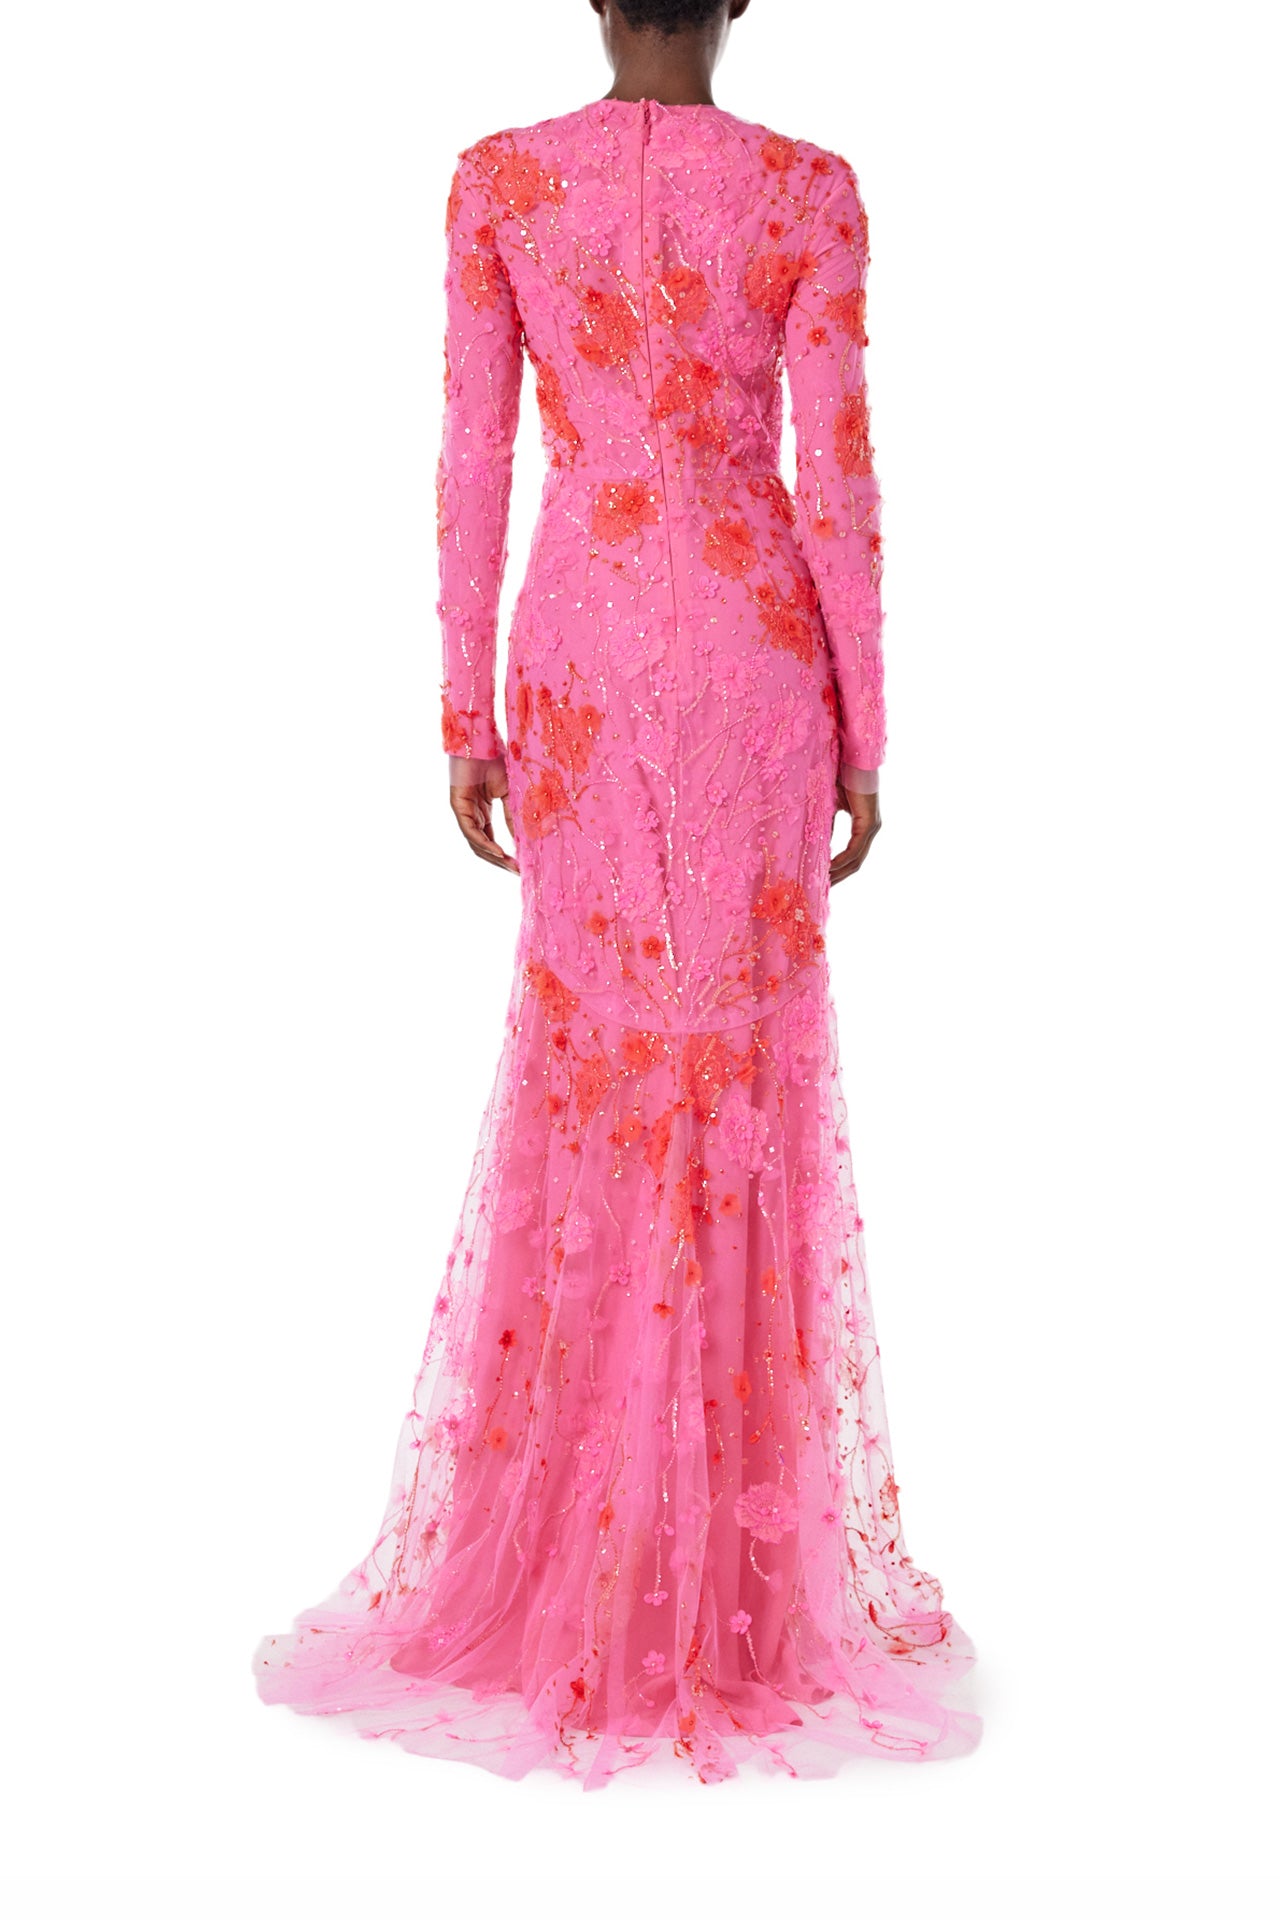 Monique Lhuillier Spring 2024 long sleeve gown in raspberry red embroidery - back.